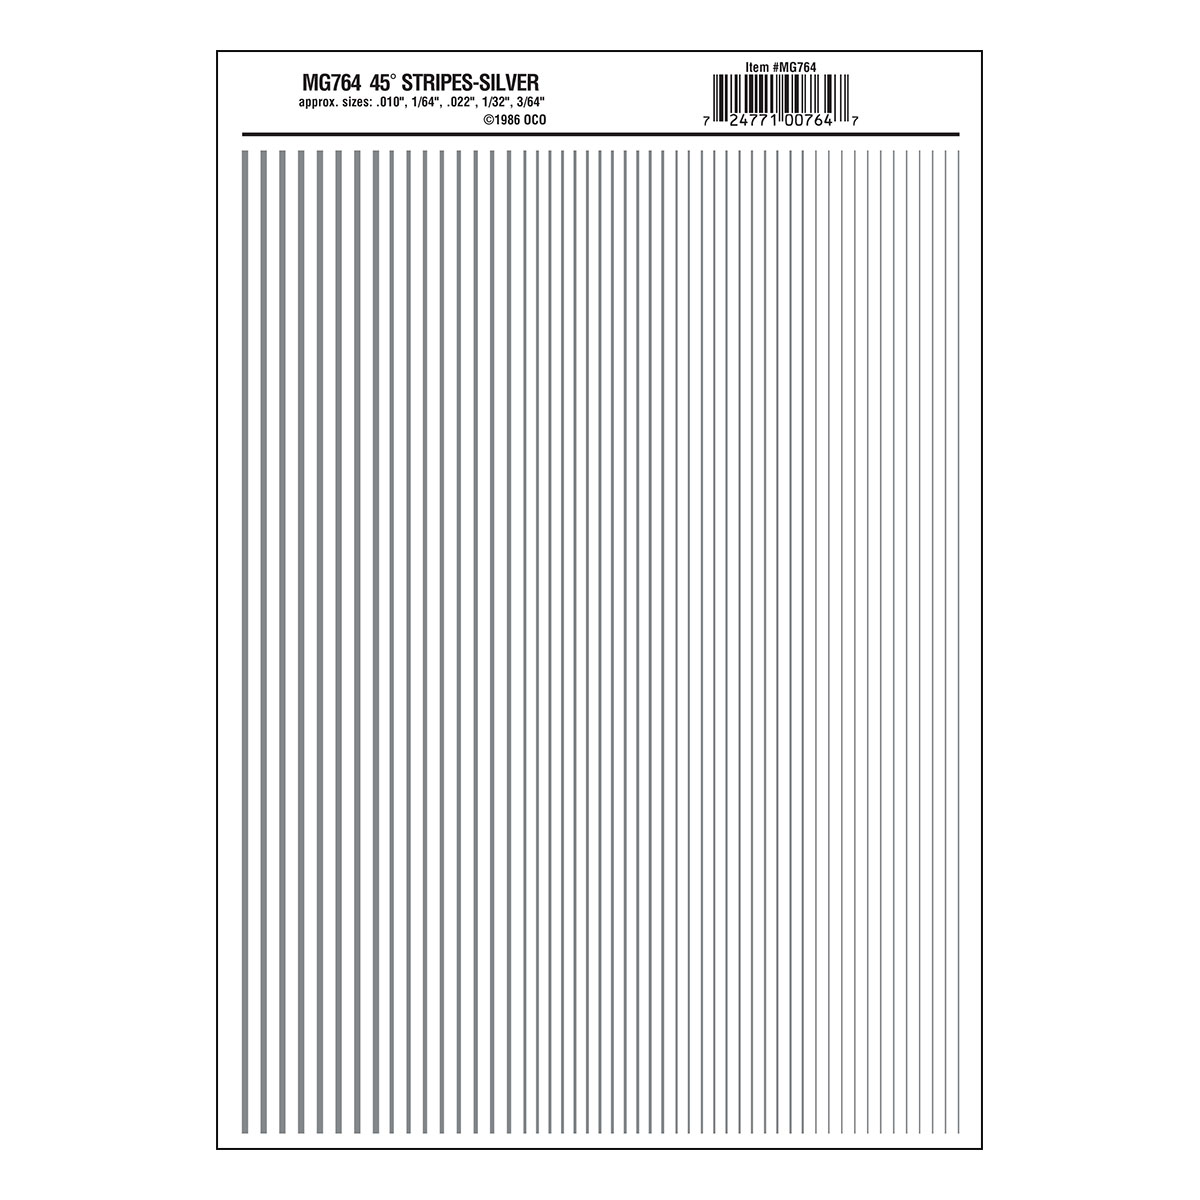 Stripes Silver - Package contains one sheet: 5 5/8" x 8 1/4" (14